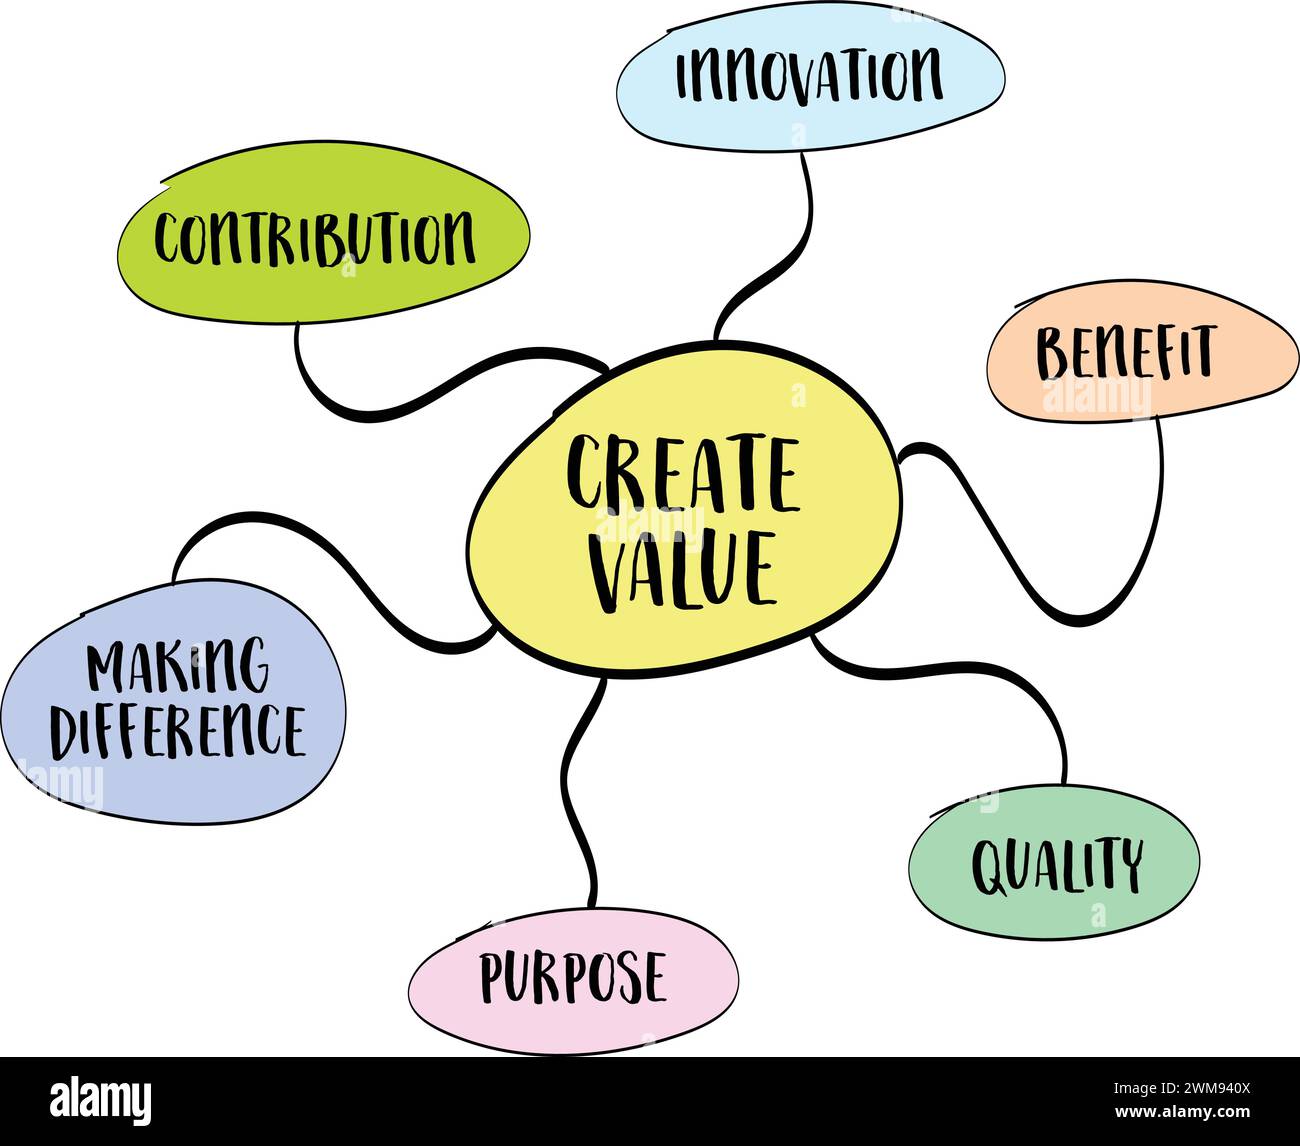 create value - mind map sketch, inspiration, creativity, contribuion, making difference and business concept Stock Vector